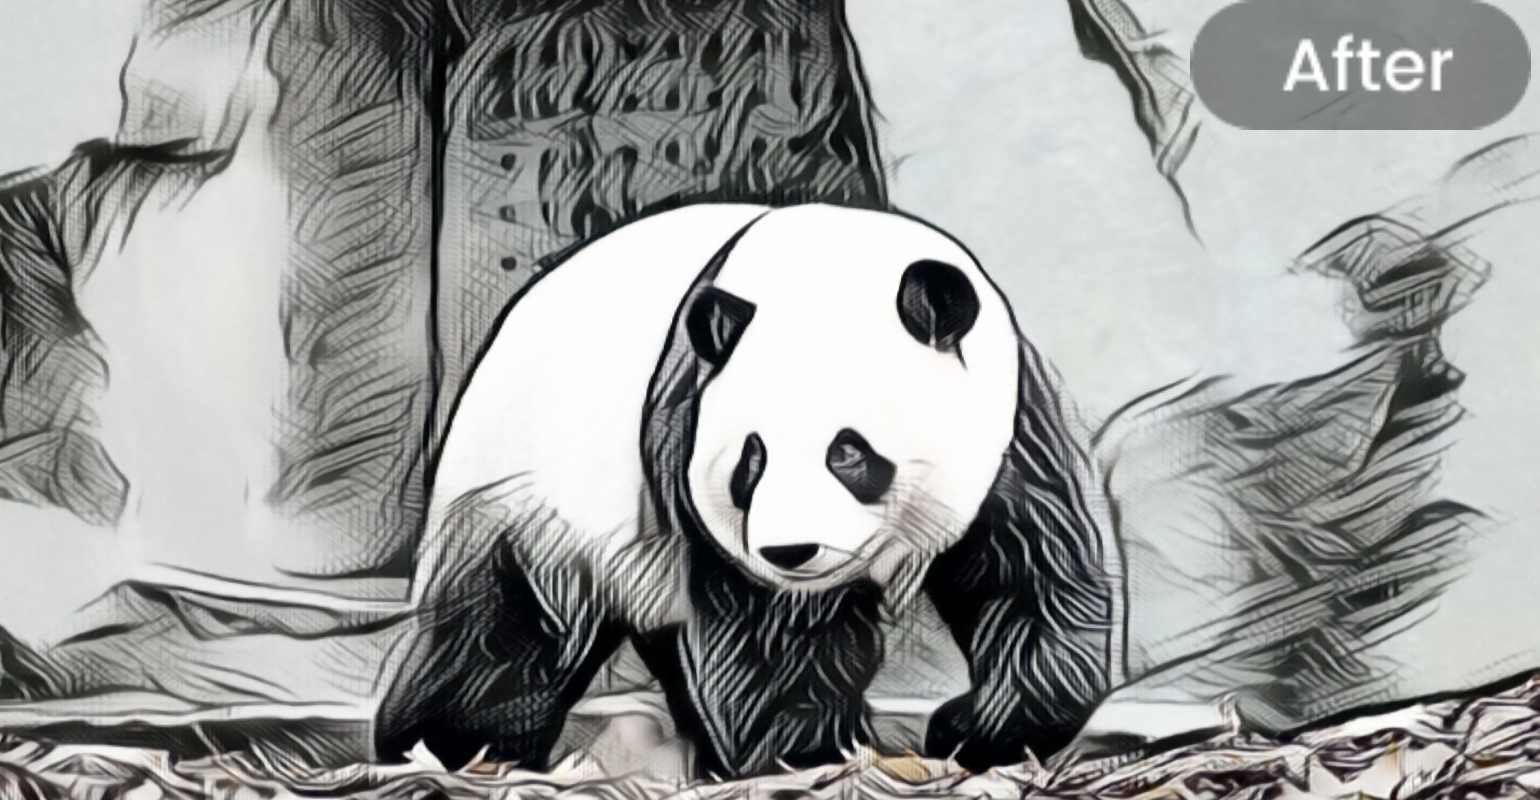 the coloring page status of a panda hanging around on a road with leves below